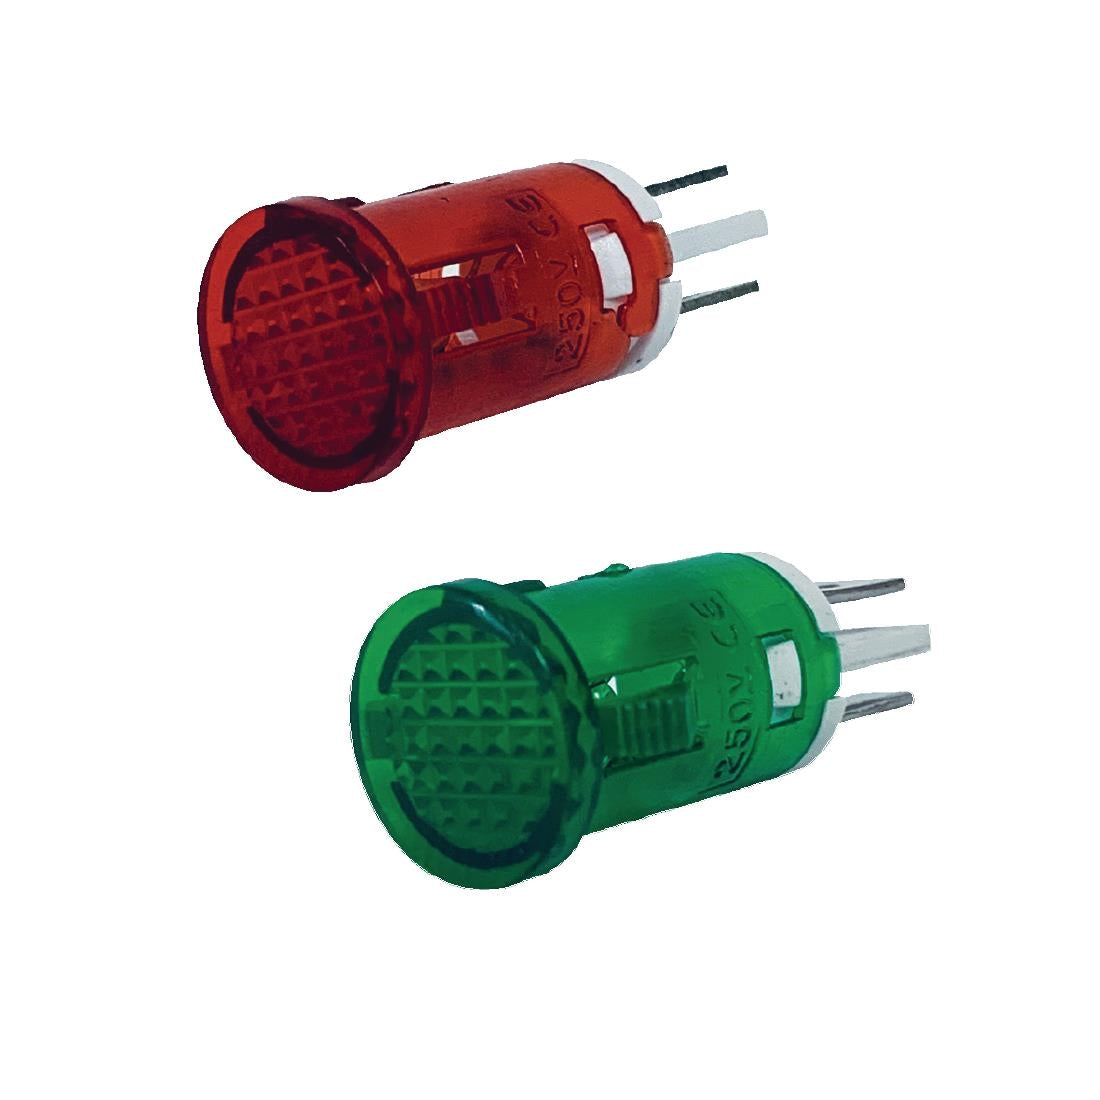 AK022 Nisbets Essentials Green and Red Indicator Lights JD Catering Equipment Solutions Ltd